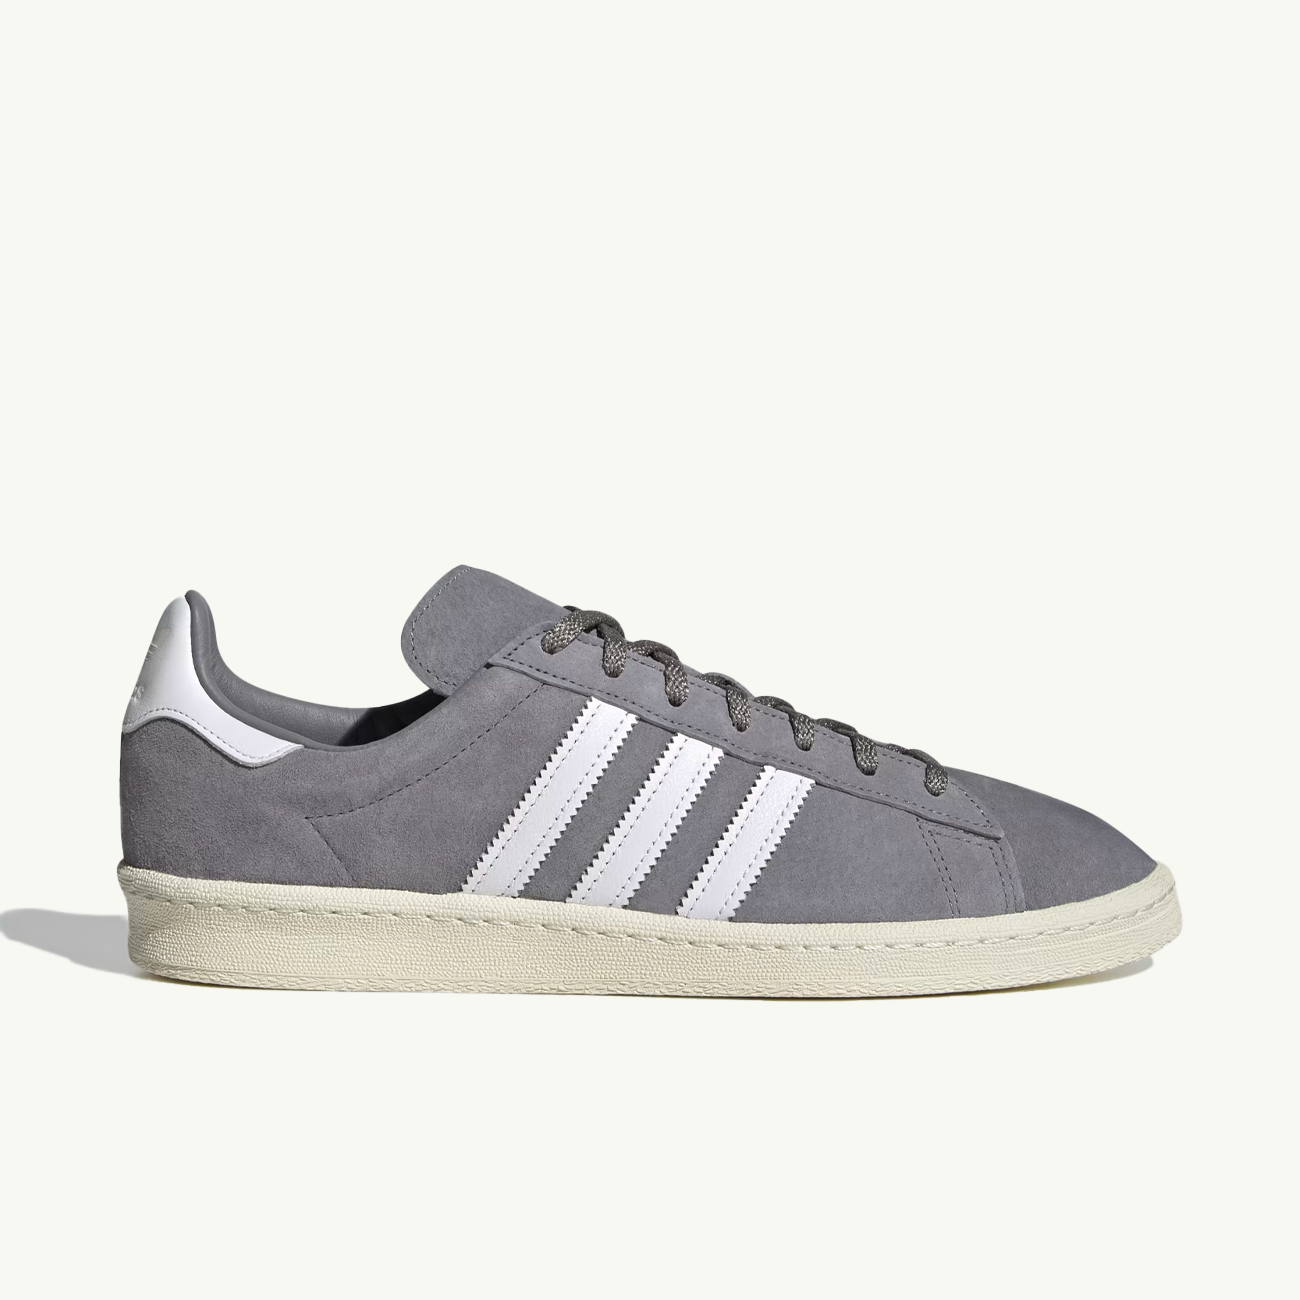 Campus 80s - Grey/Cloud White/Off White